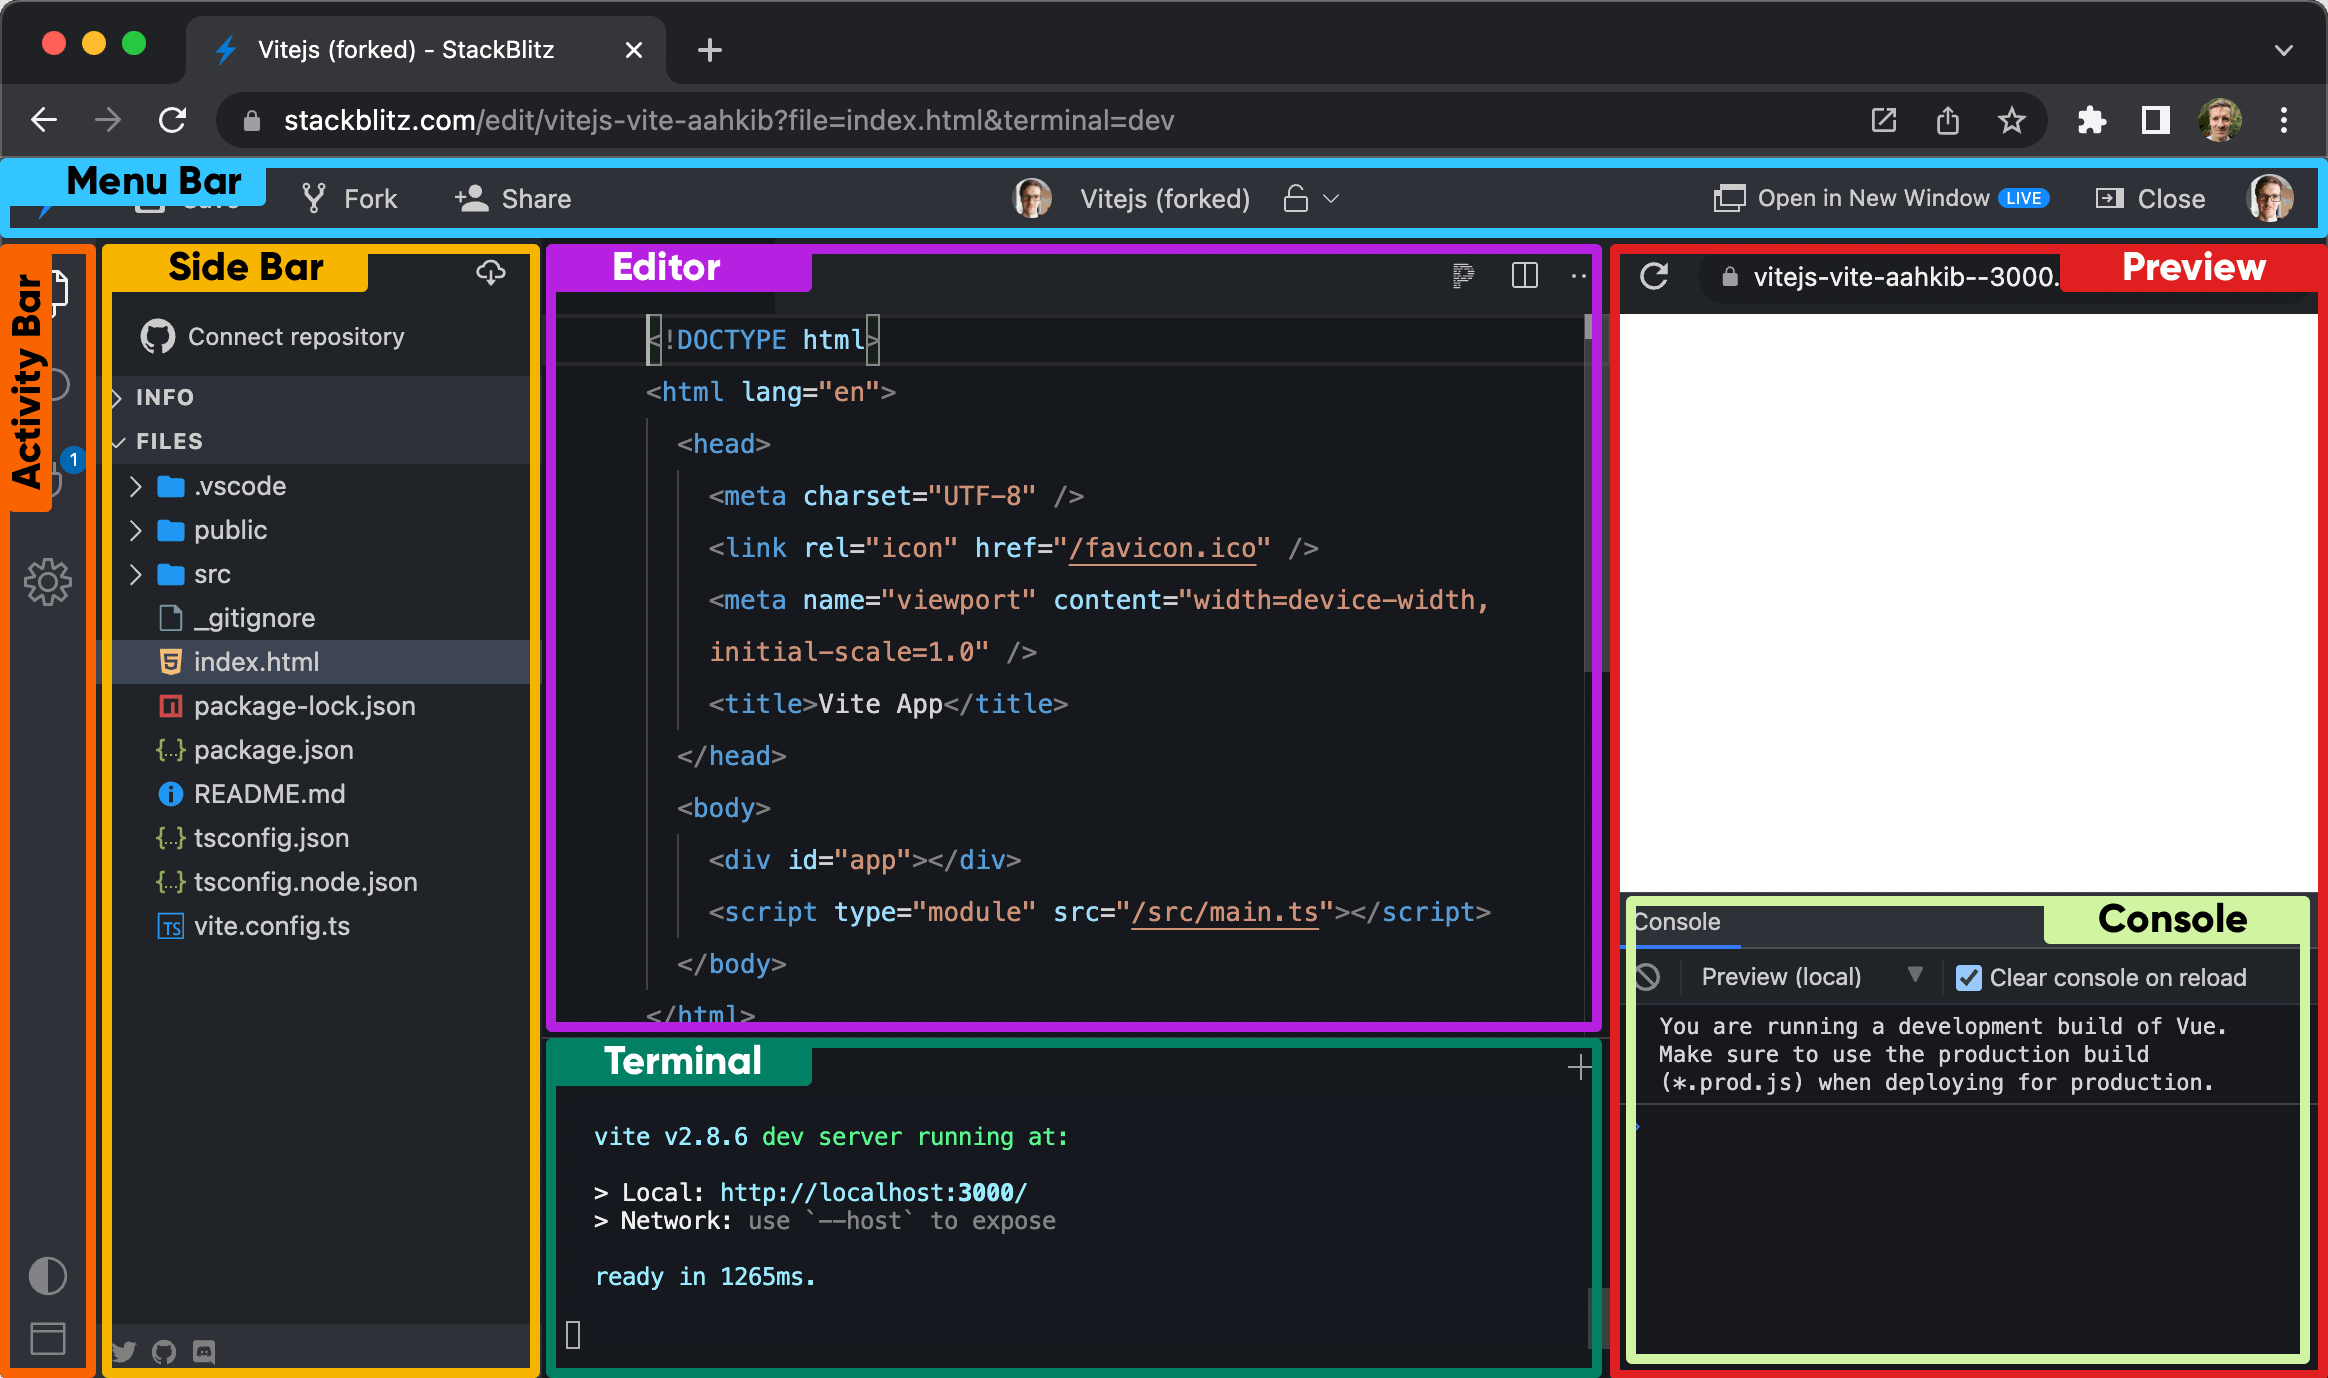 Overview of the StackBlitz IDE user interface elements